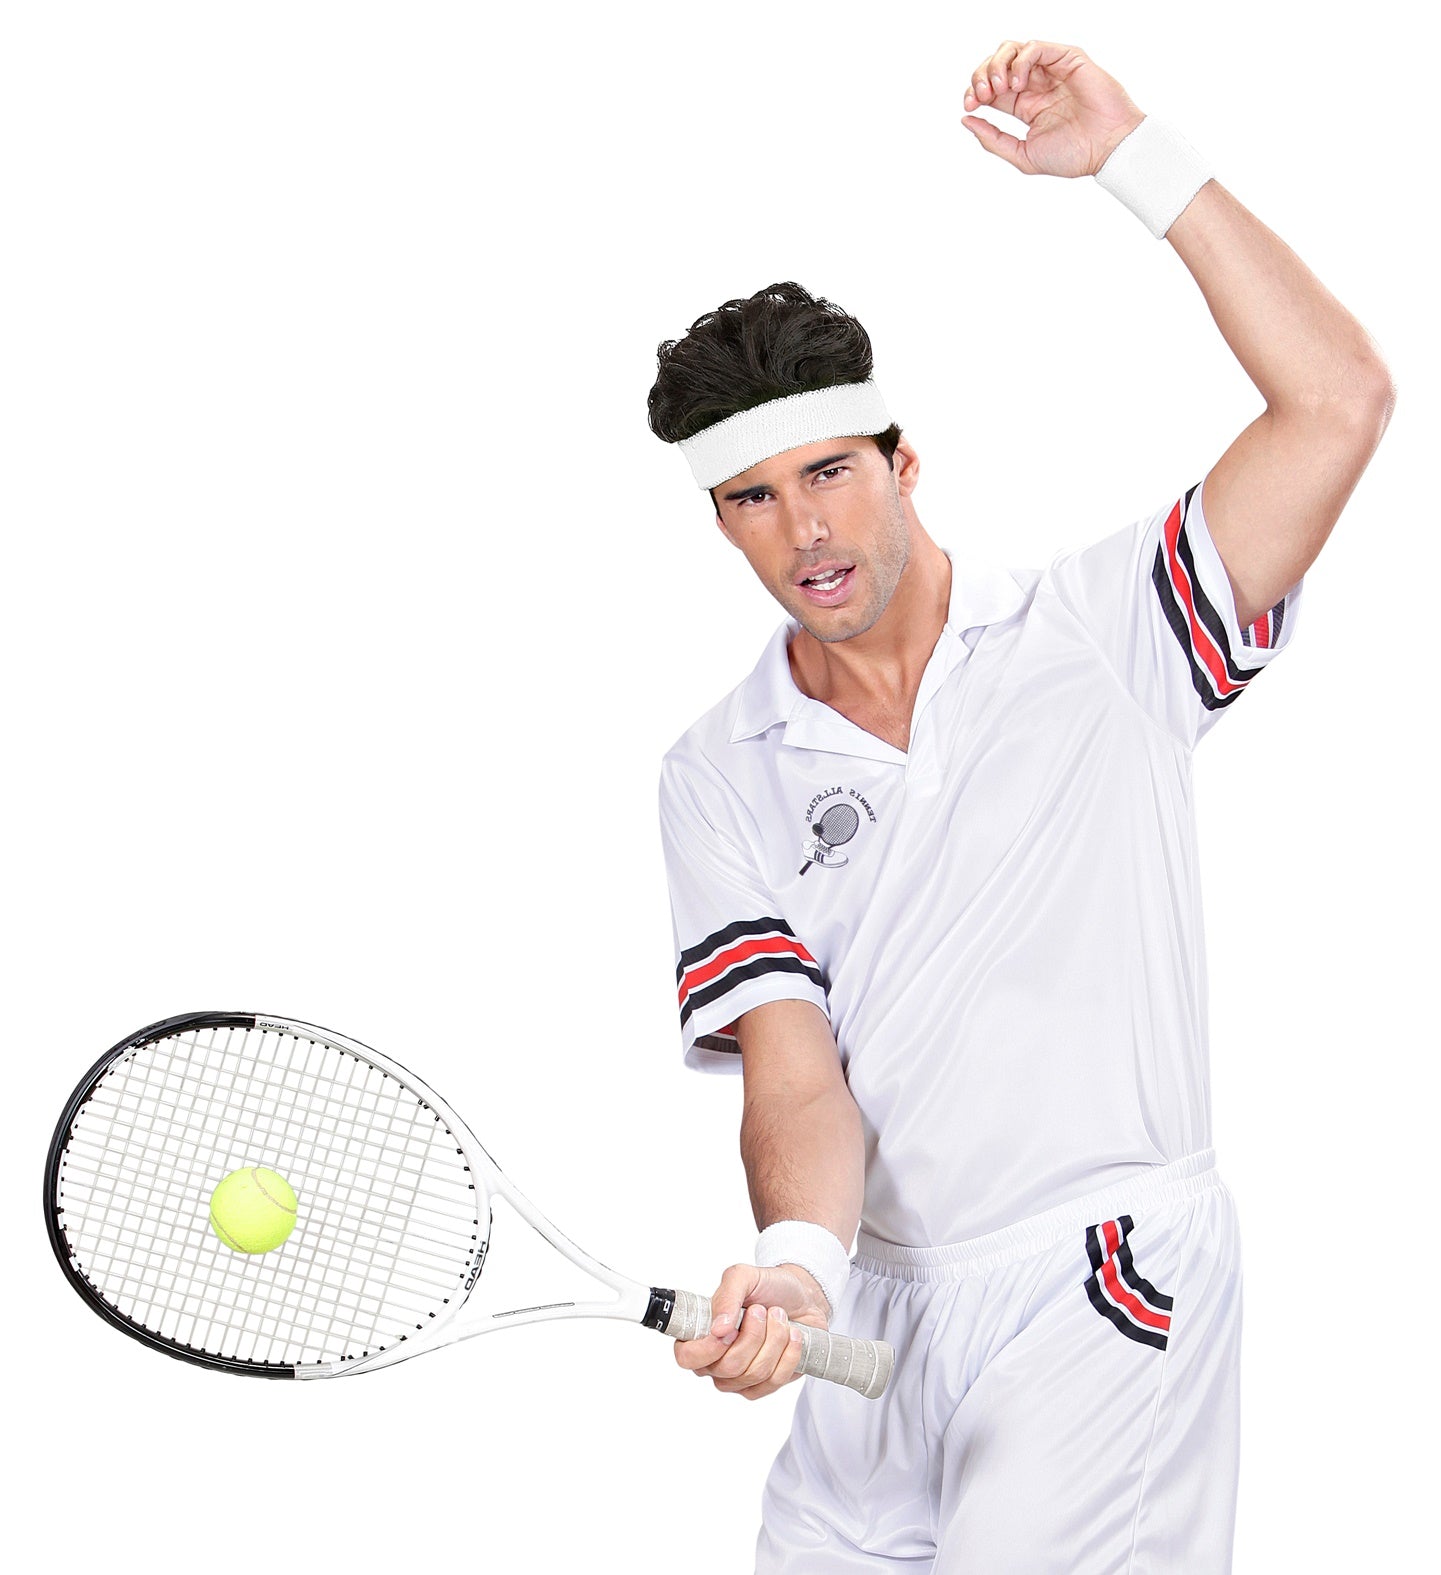 White 80's Sweatband and Wristbands set for tennis costume